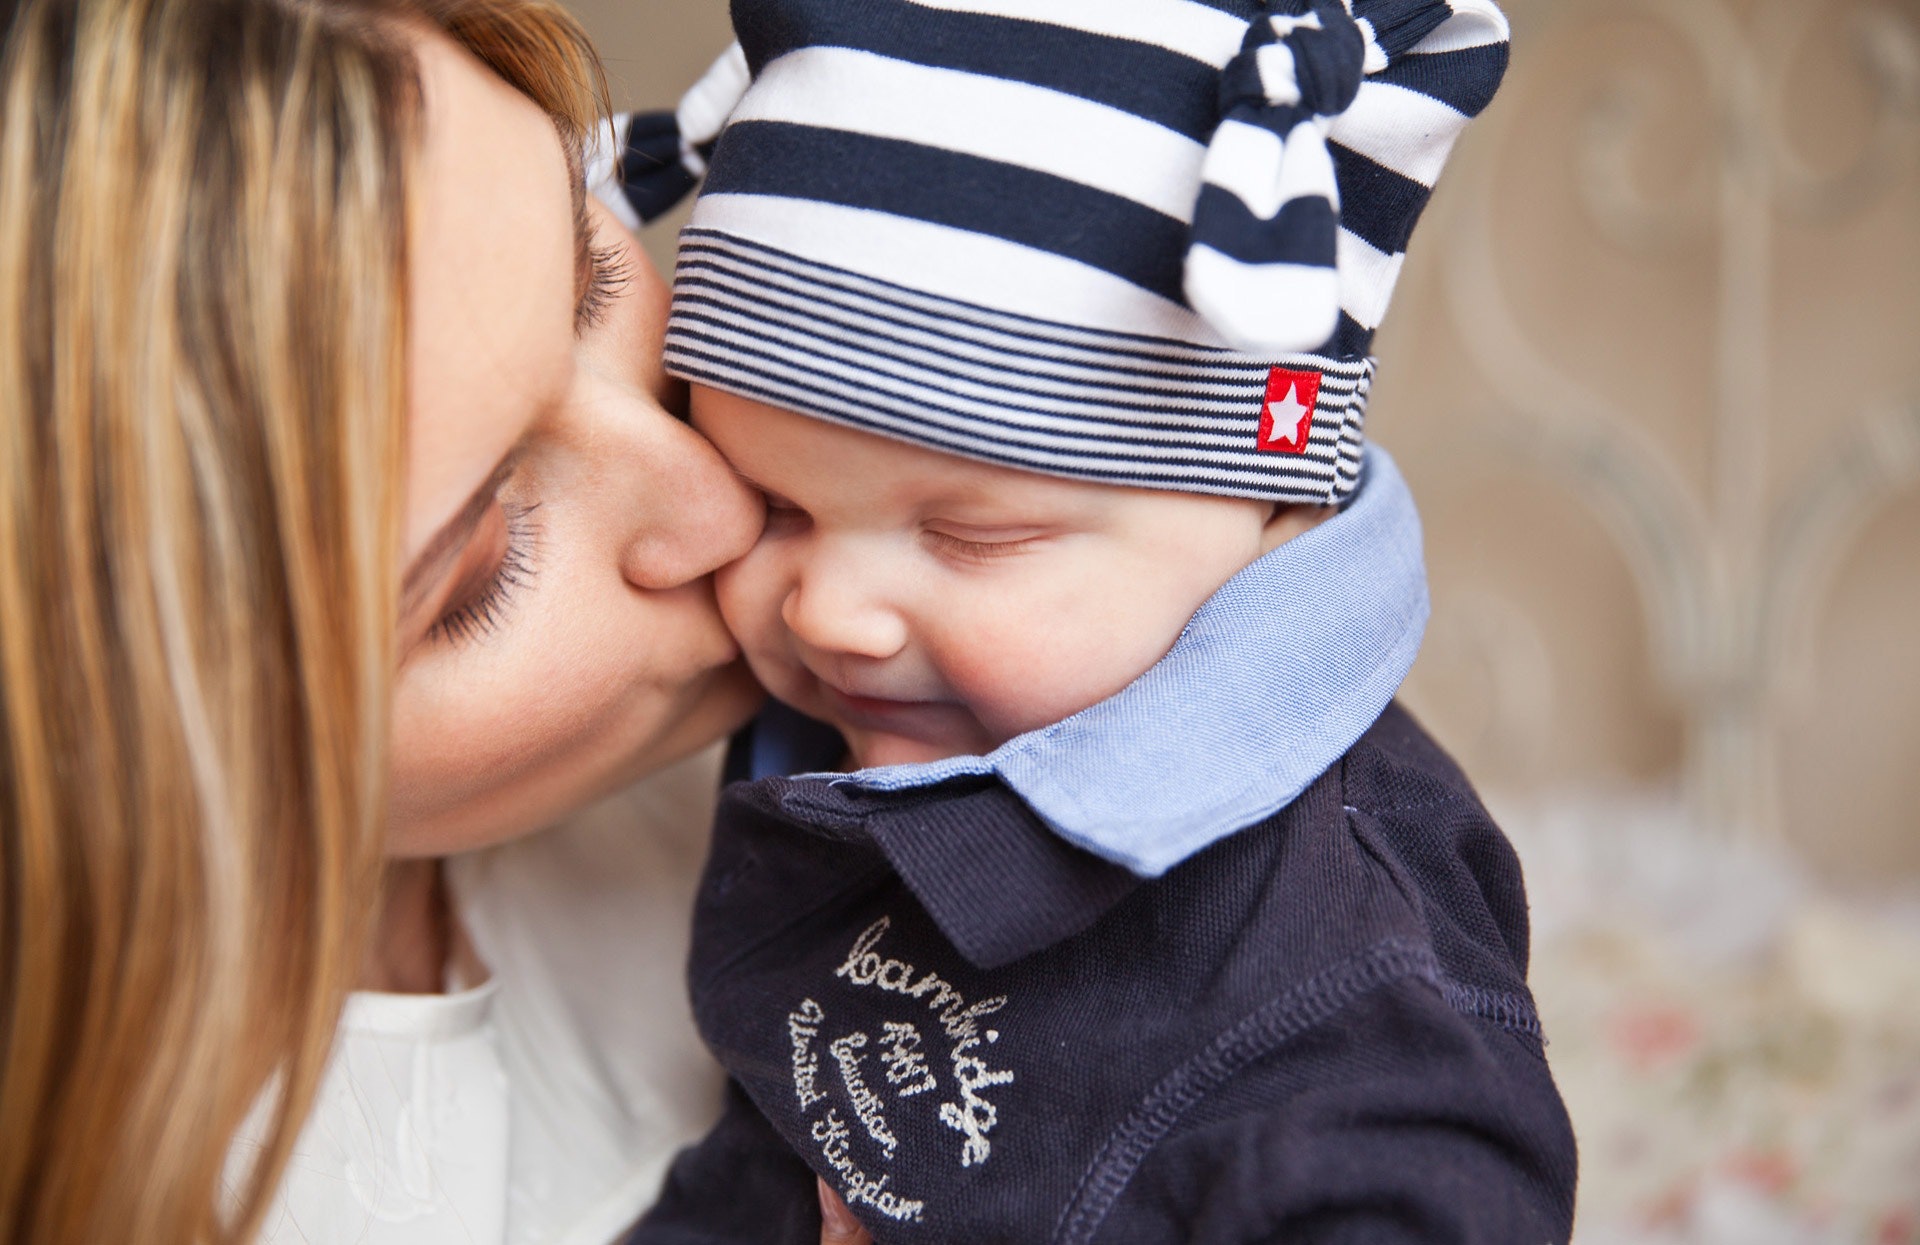 Woman in white shirt kissing baby with black and white stripe knit cap photo